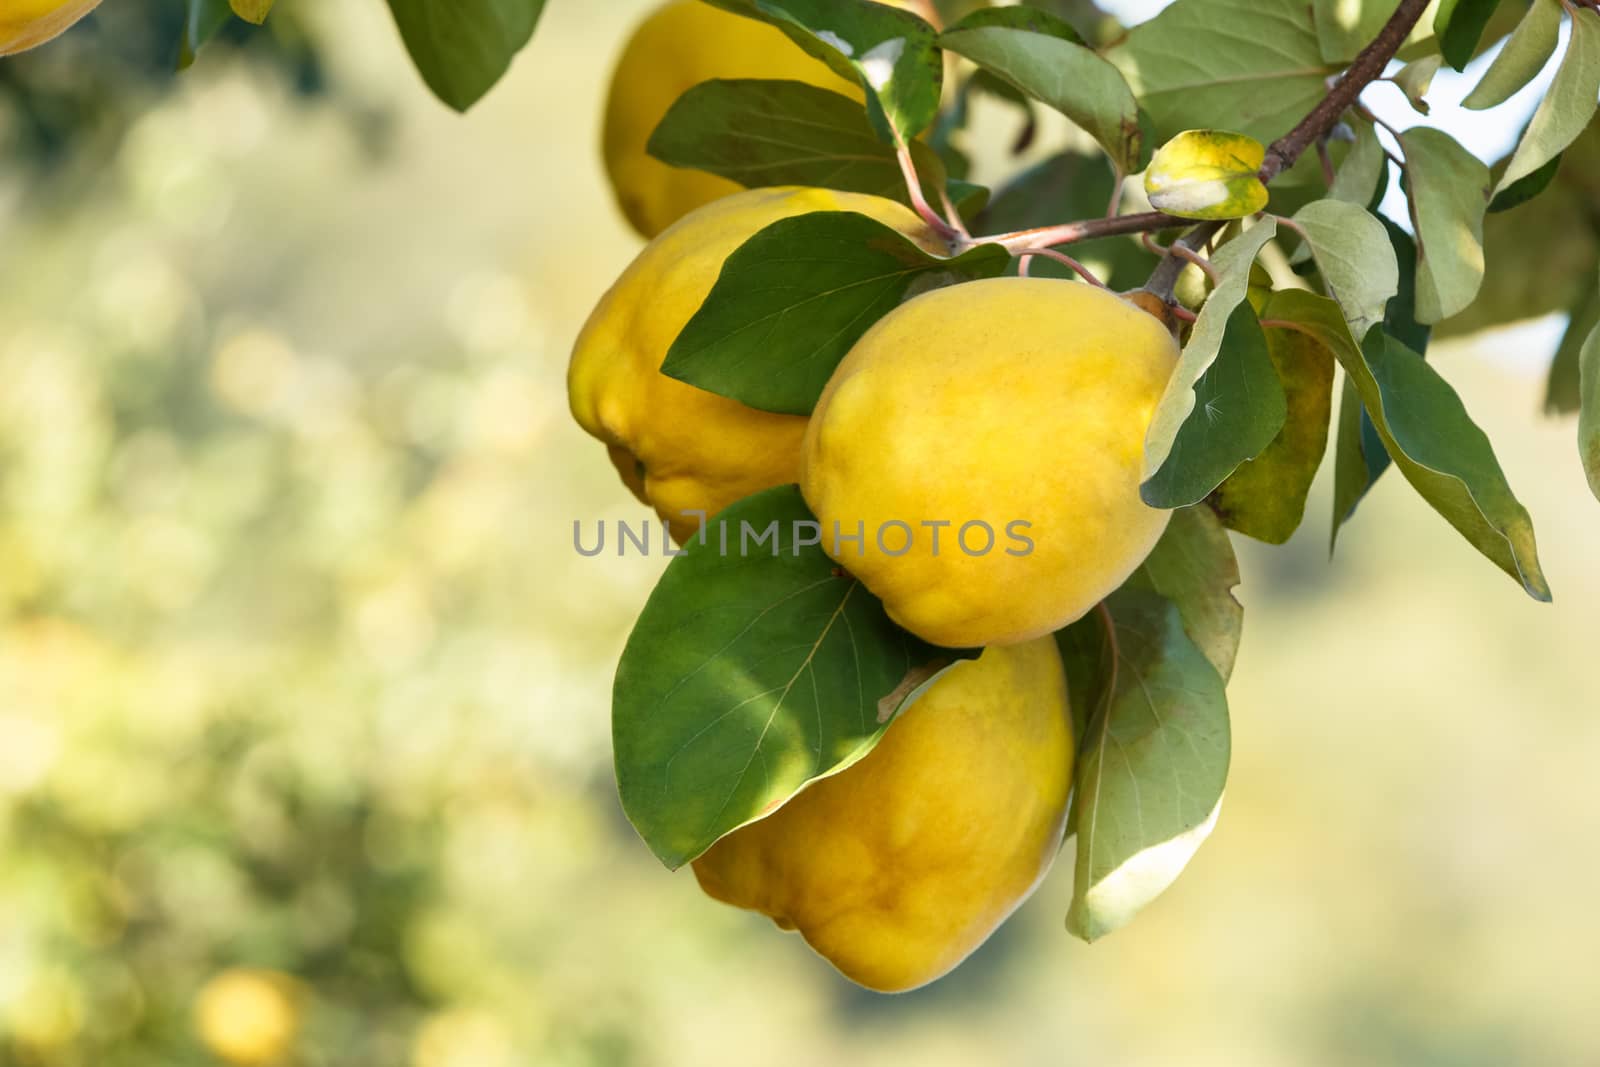 Ripe Quinces on the tree